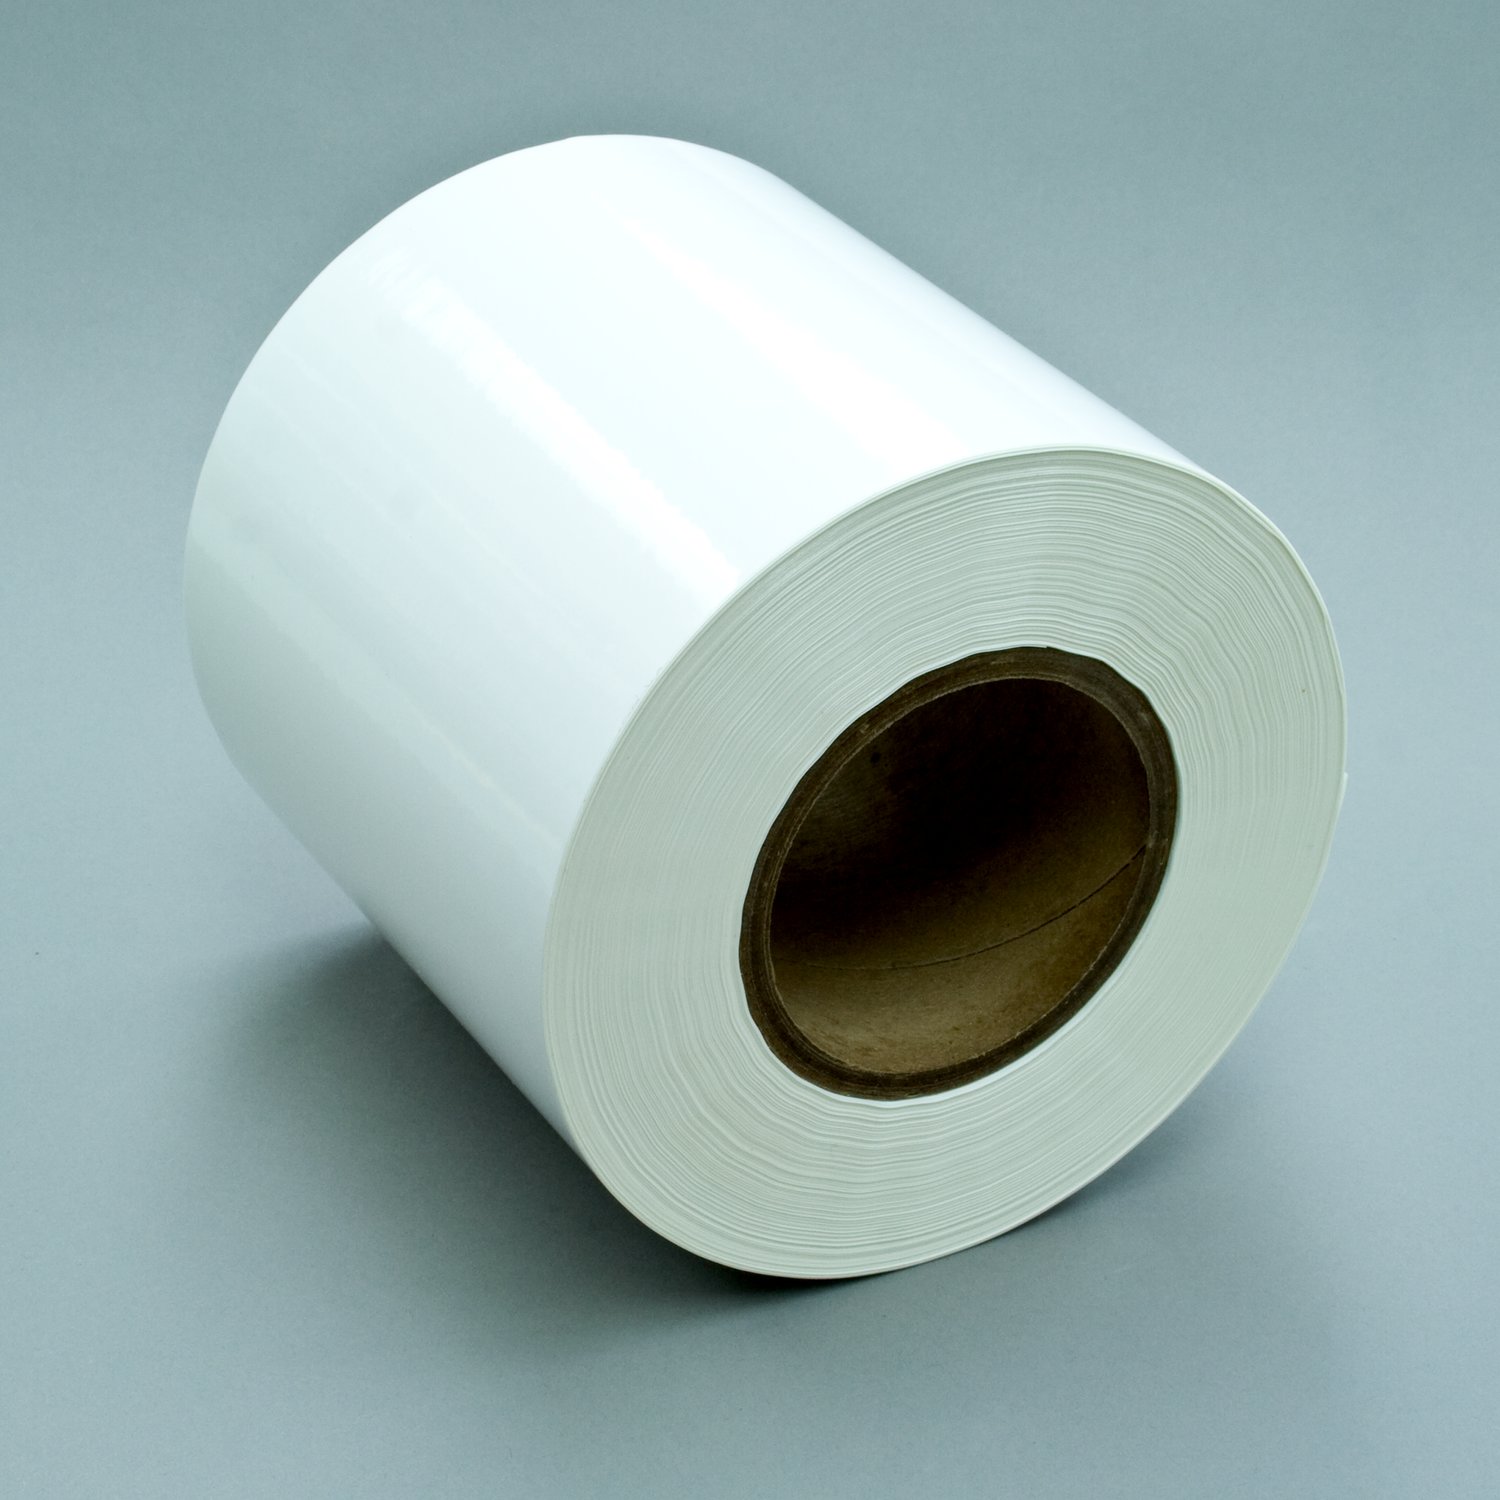 7100012138 - 3M Sheet and Screen Label Material 7931, White Polyester Gloss, Roll,
Config